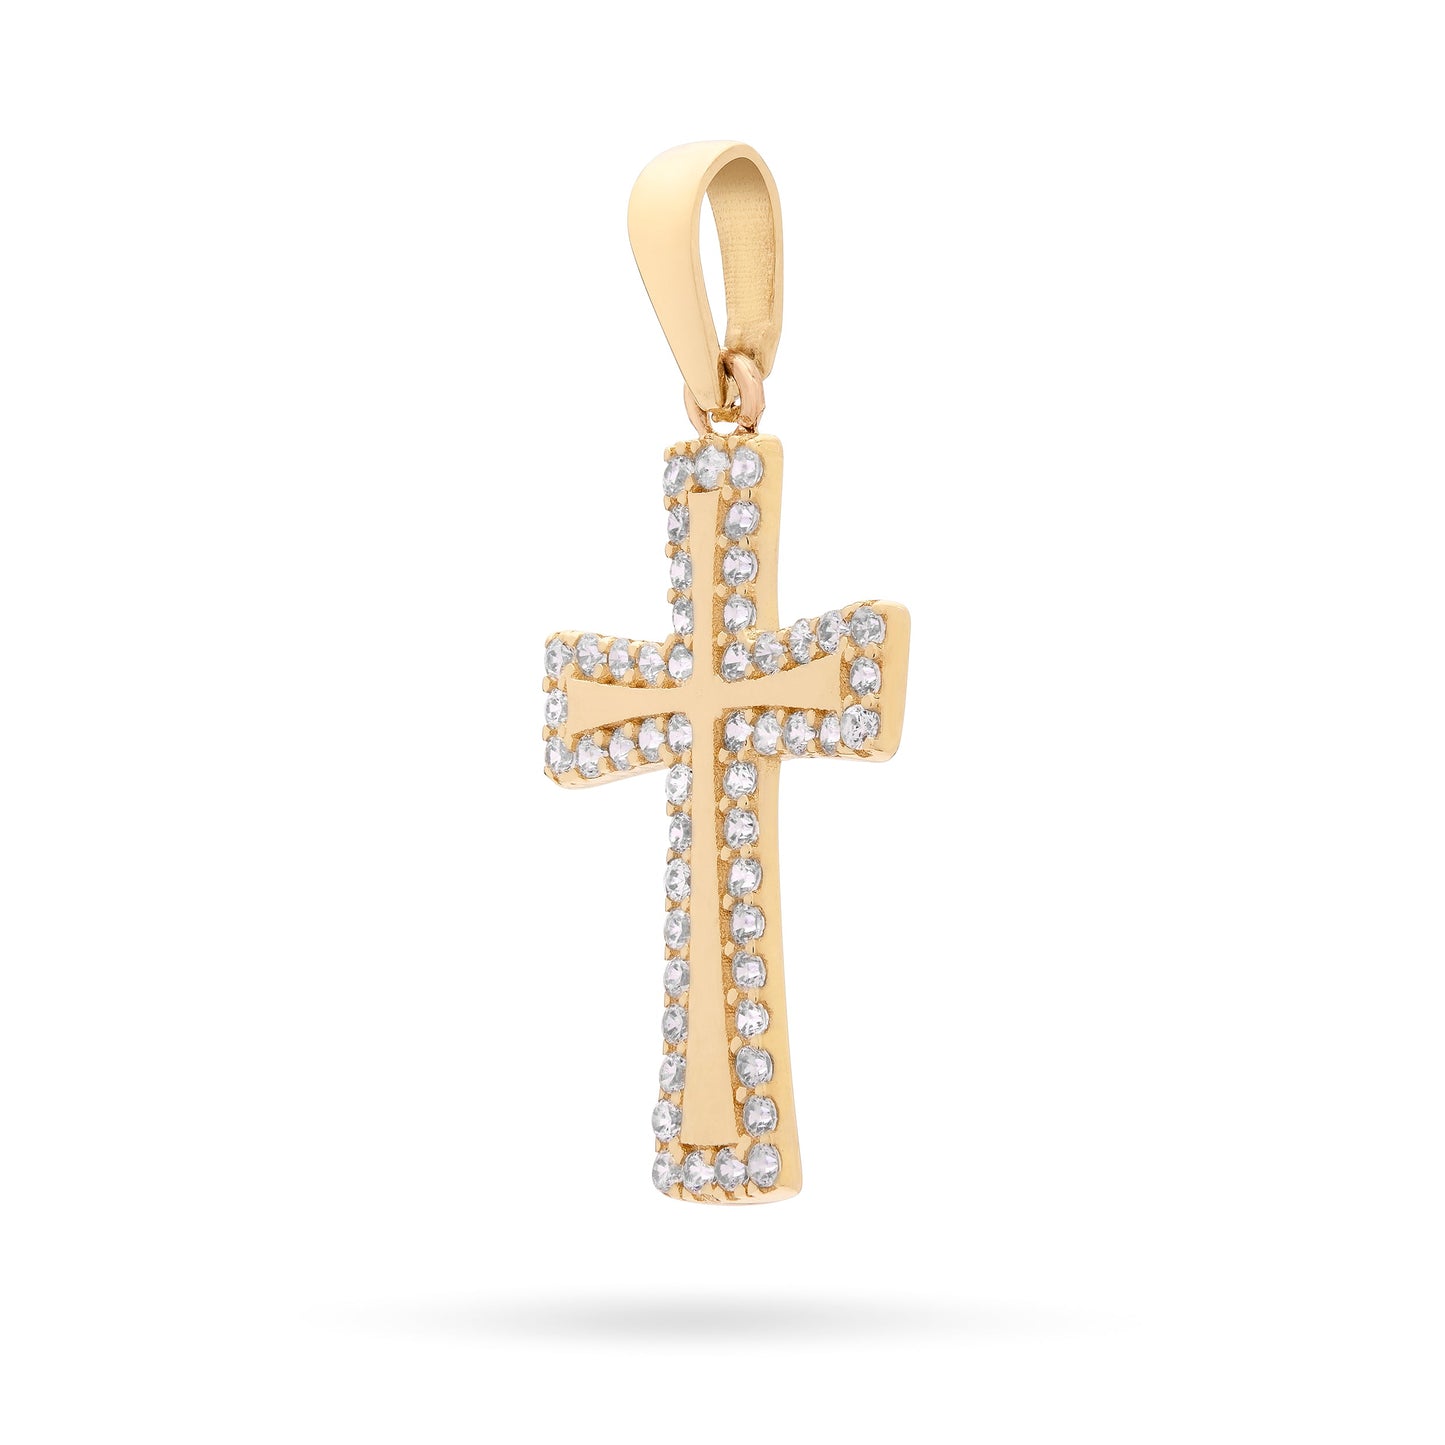 Mondo Cattolico Pendant 21 mm (0.83 in) Yellow Gold Cross Pendant With Cubic Zirconia on the Outline